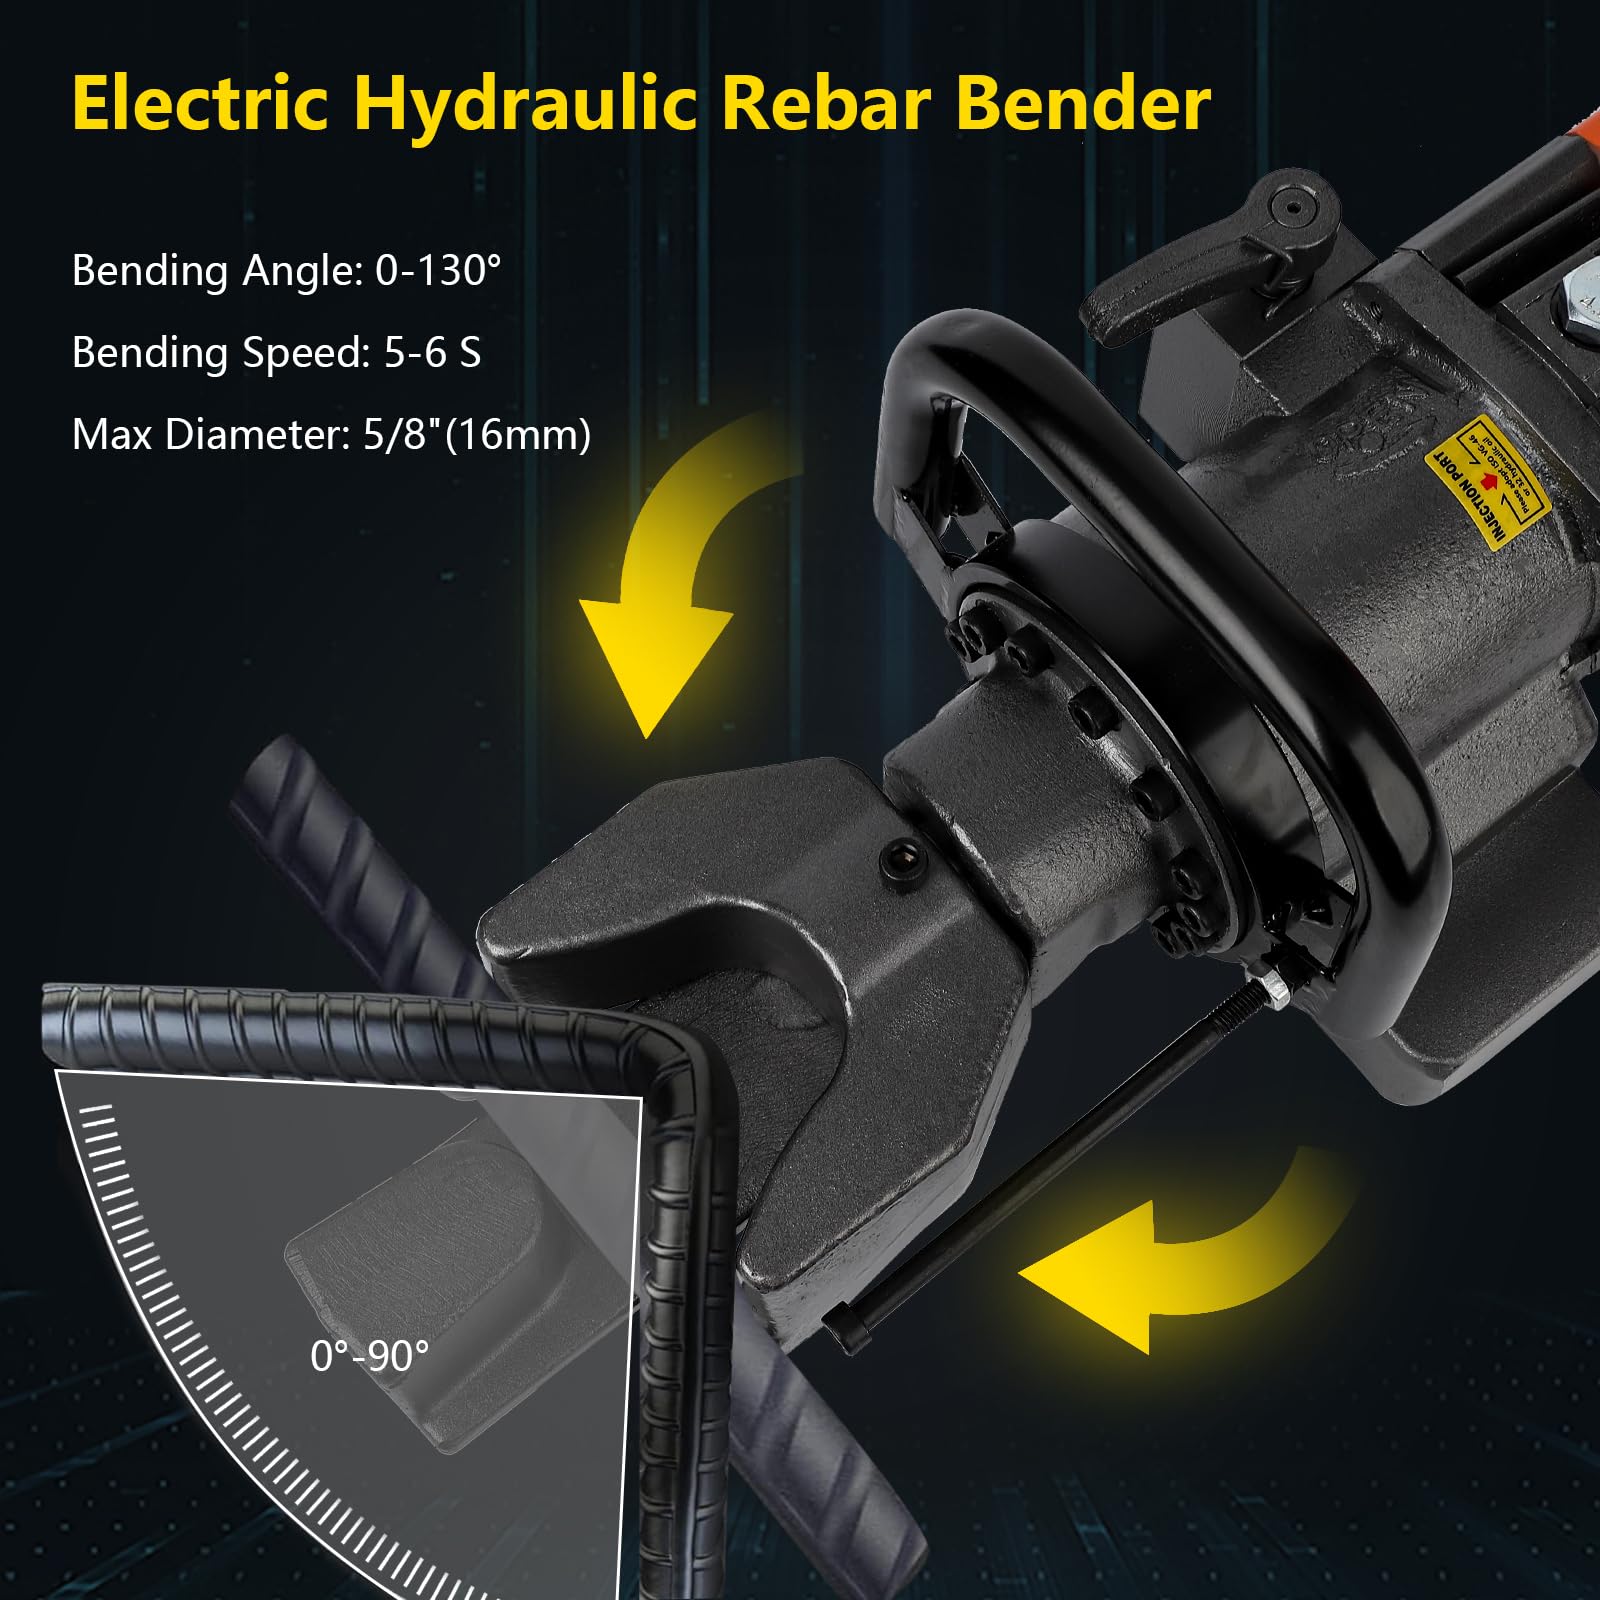 900W Electric Hydraulic Rebar Bender Bending up to 5/8 Inch